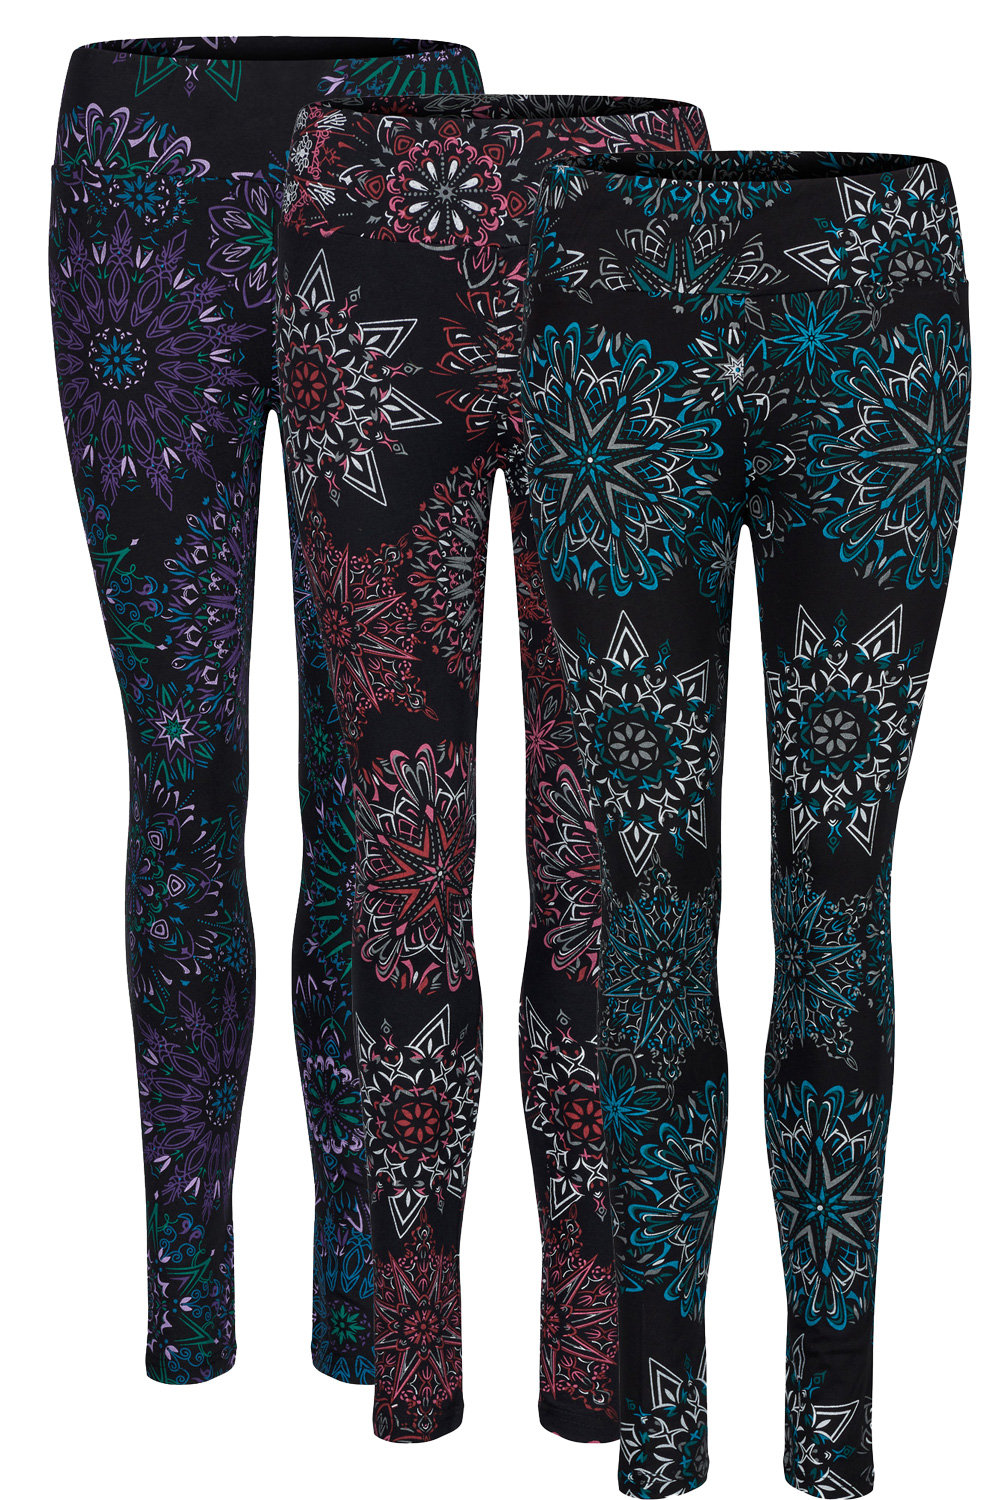 Wholesale Women's Leggings Trousers Colorful Floral Embroidered